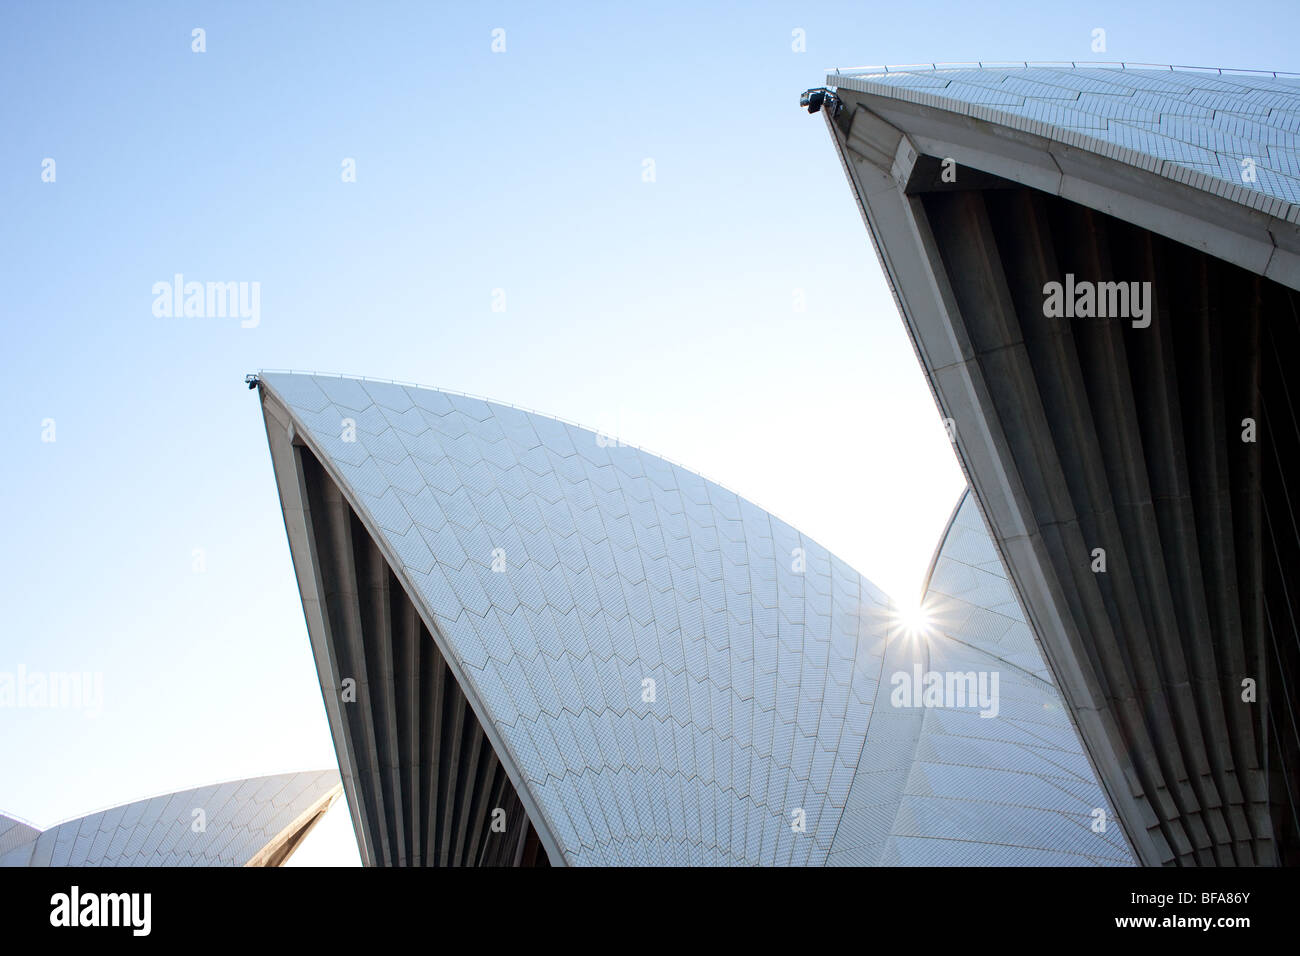 The shells of the Sydney Opera House, one of the world's most famous ...